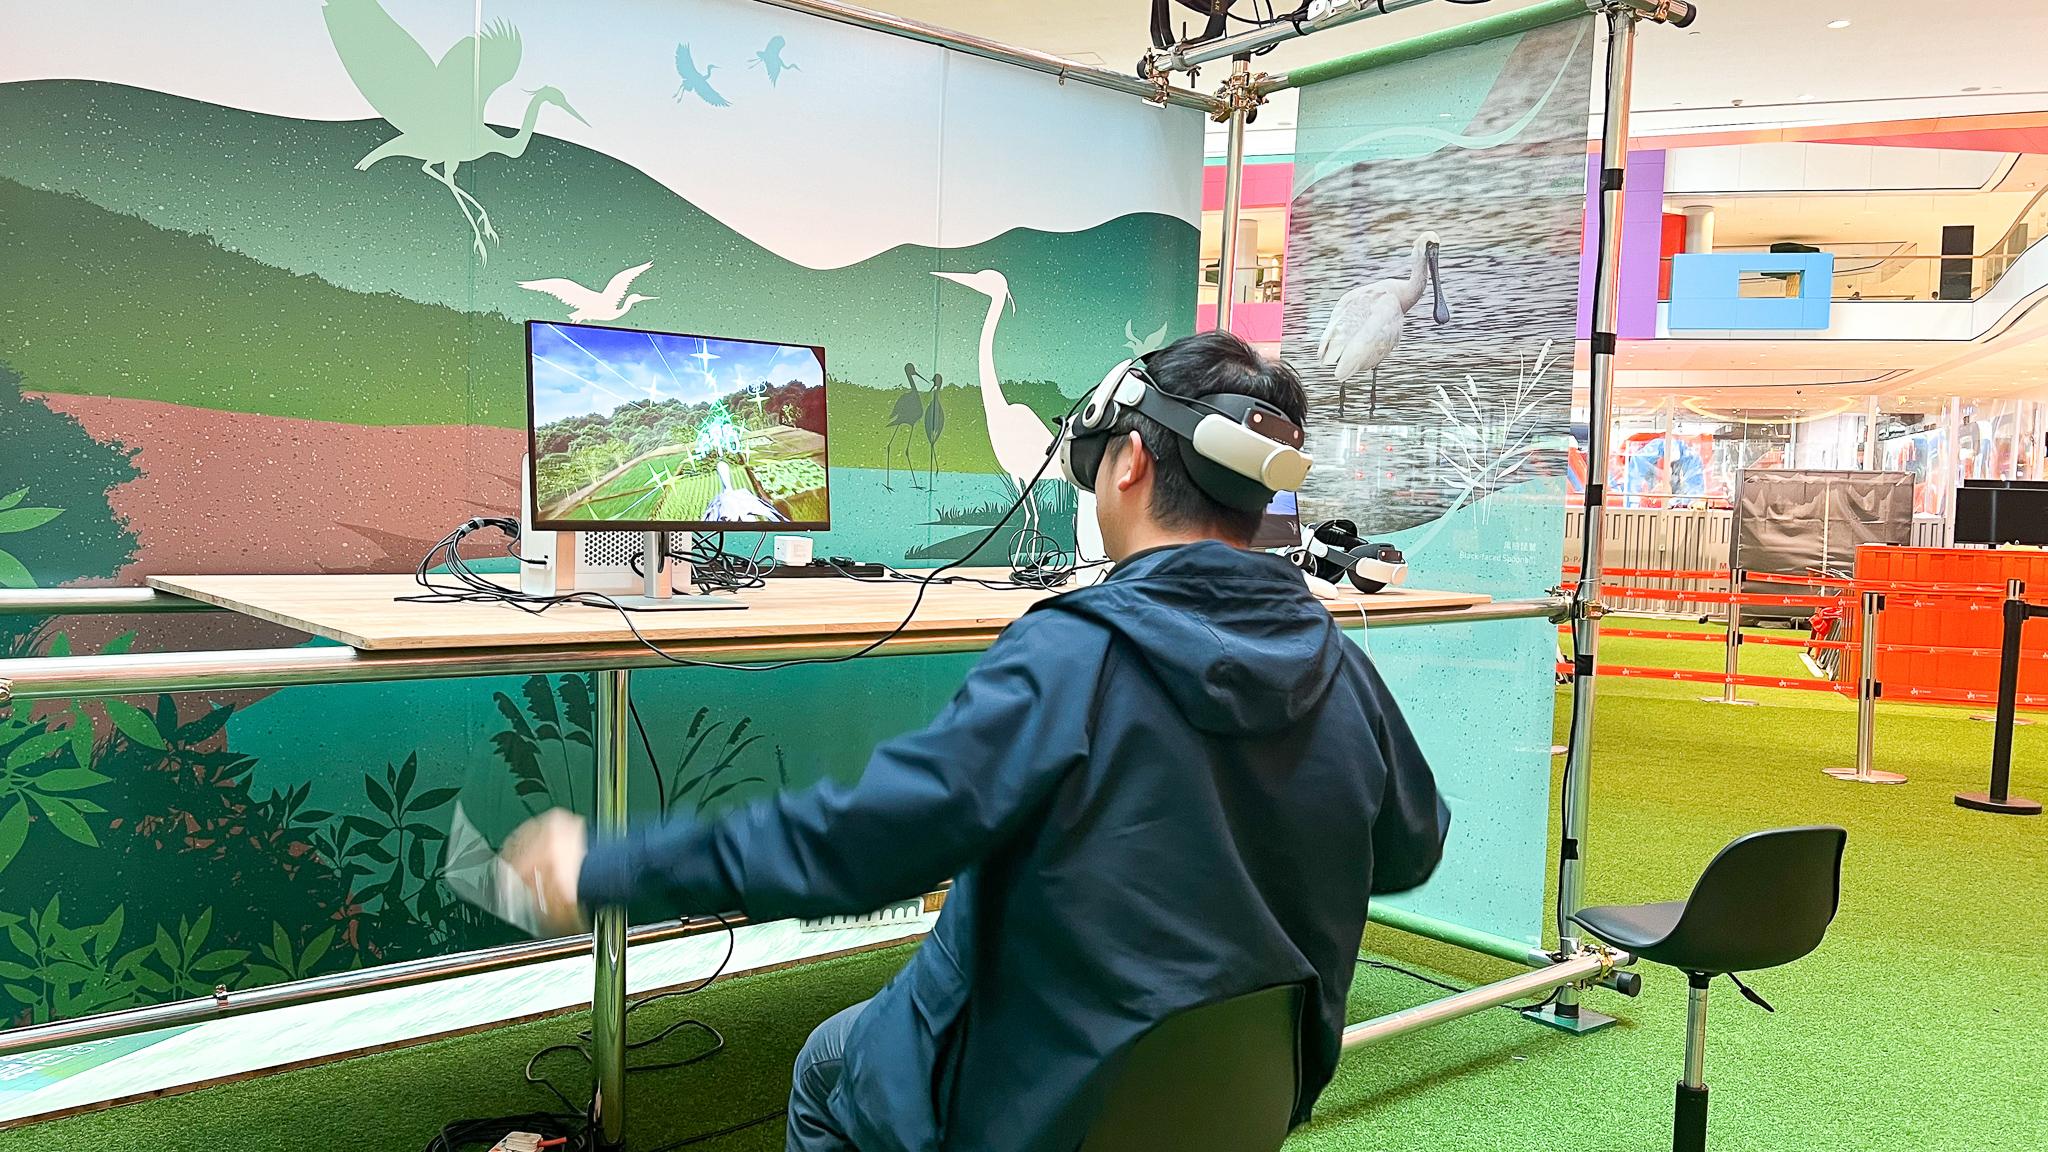 Organised by the Countryside Conservation Office, the roving exhibition entitled "Explore the Enchanting Countryside" will be launched tomorrow (February 20). Various interactive games are provided for the public to participate in, including virtual reality games that take visitors into wetlands to explore a treasure hunt adventure in fishponds. 